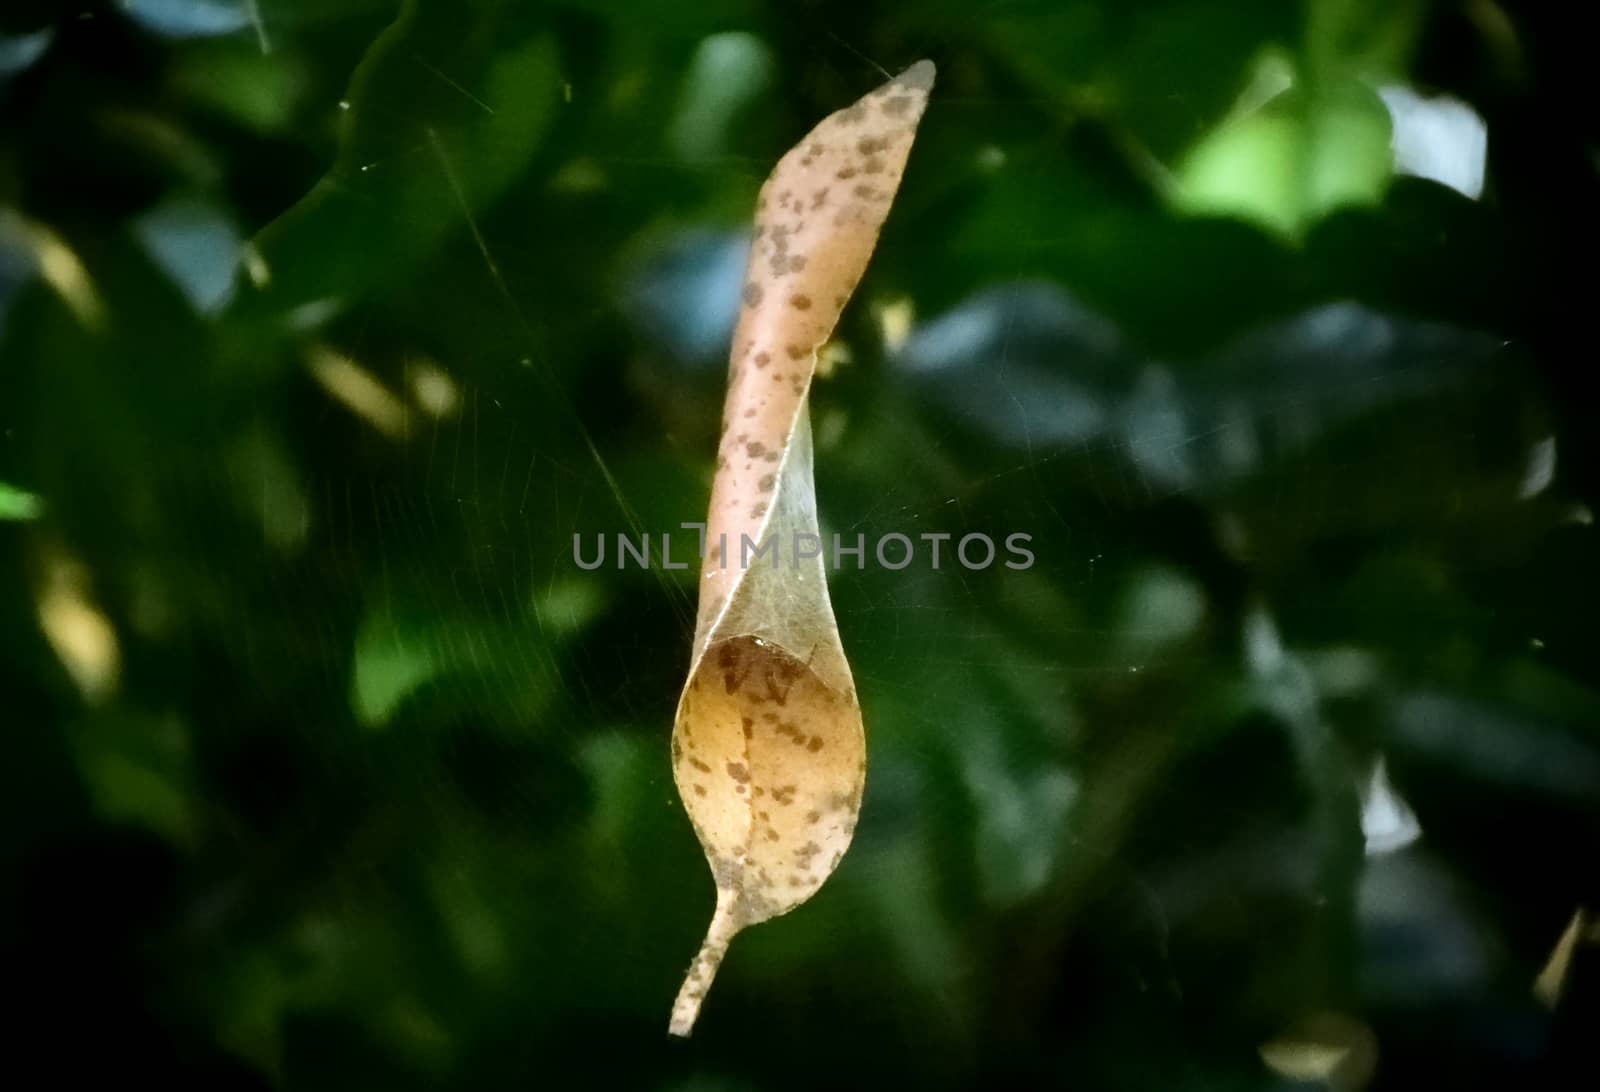 A small spider curled up inside a leaf